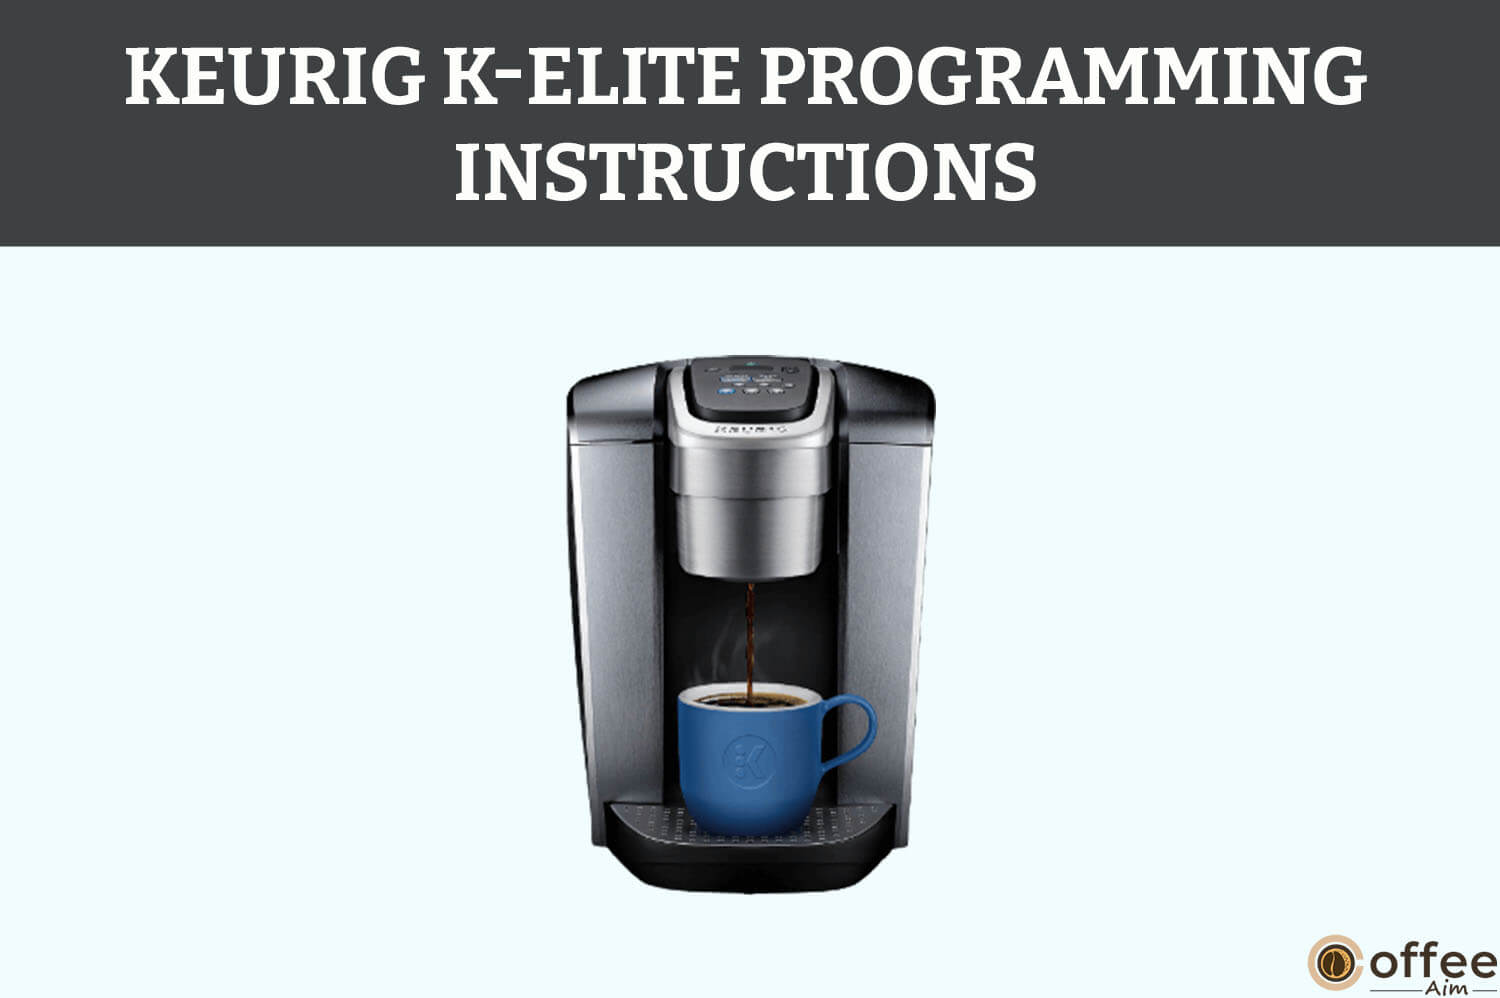 Featured image for the article "Keurig K-Elite Programming Instructions"